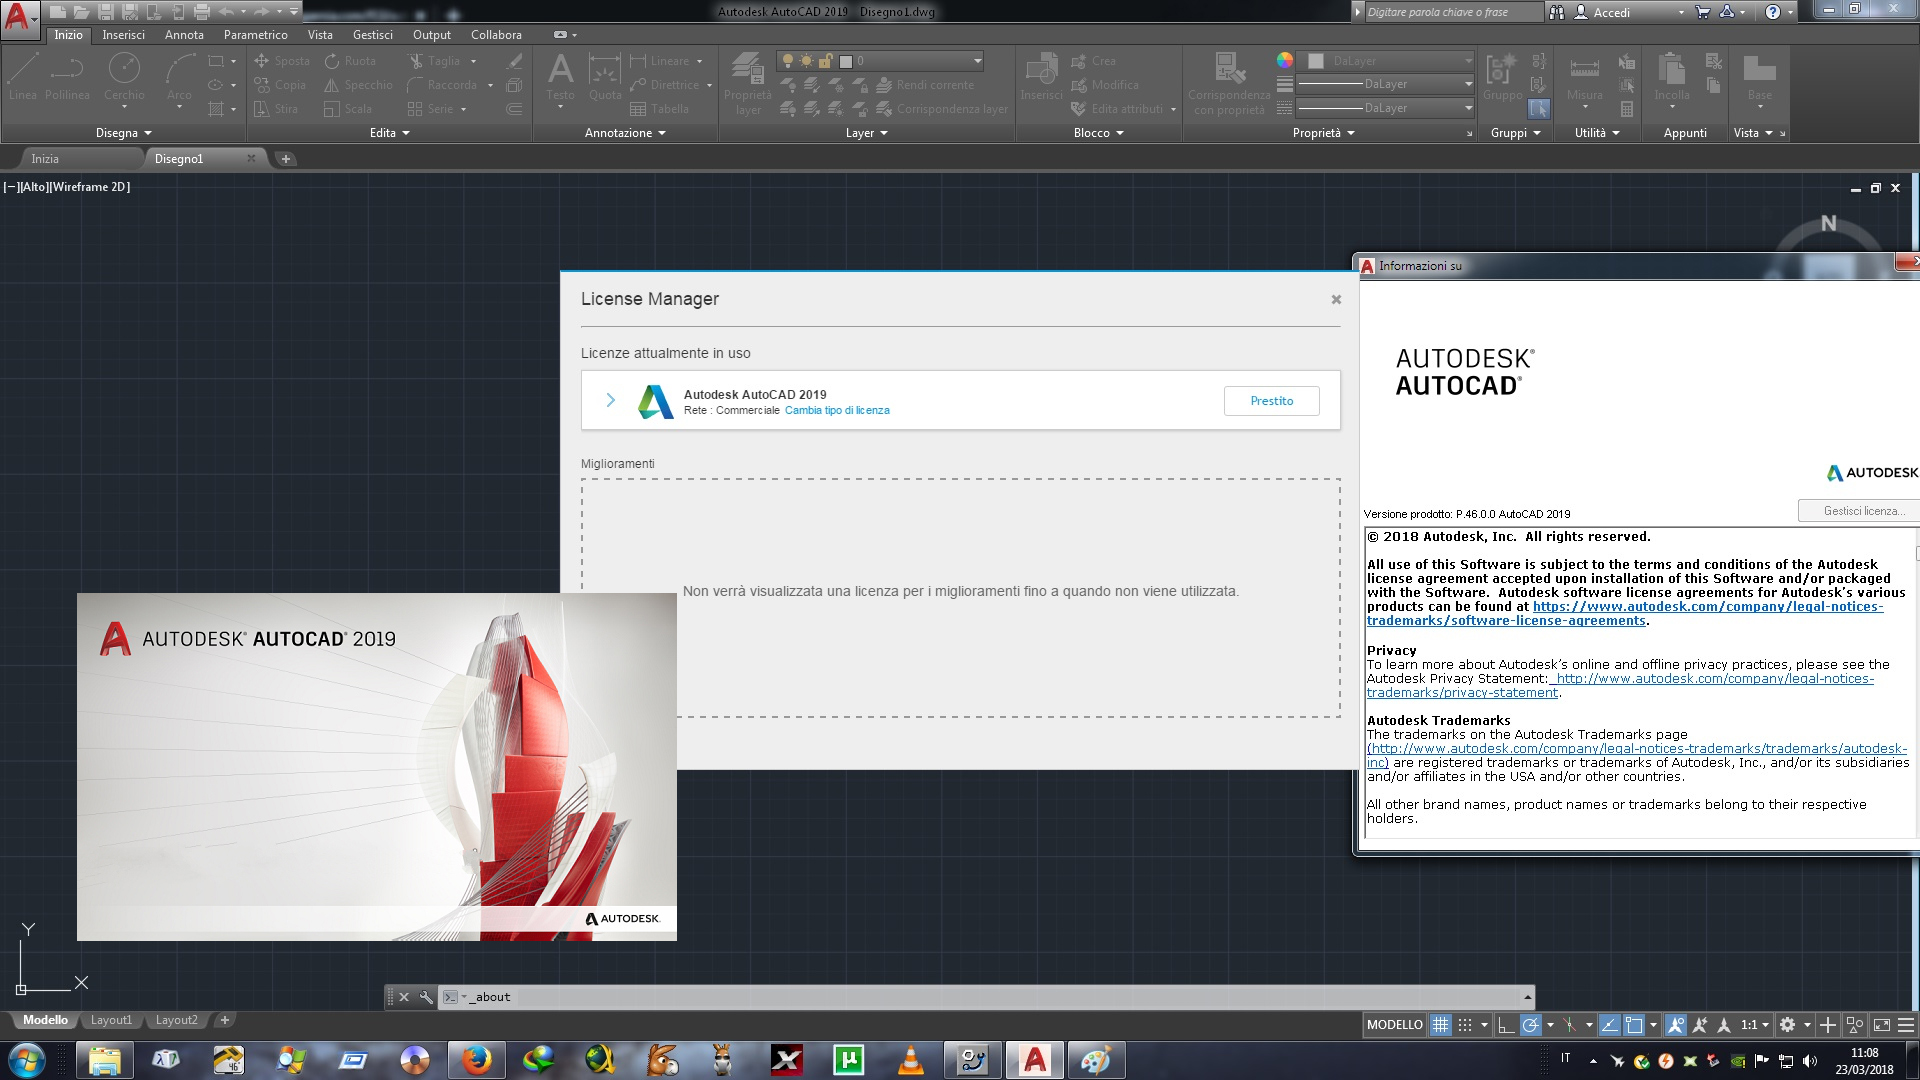 autodesk autocad 2019 install and activate autocad 2019